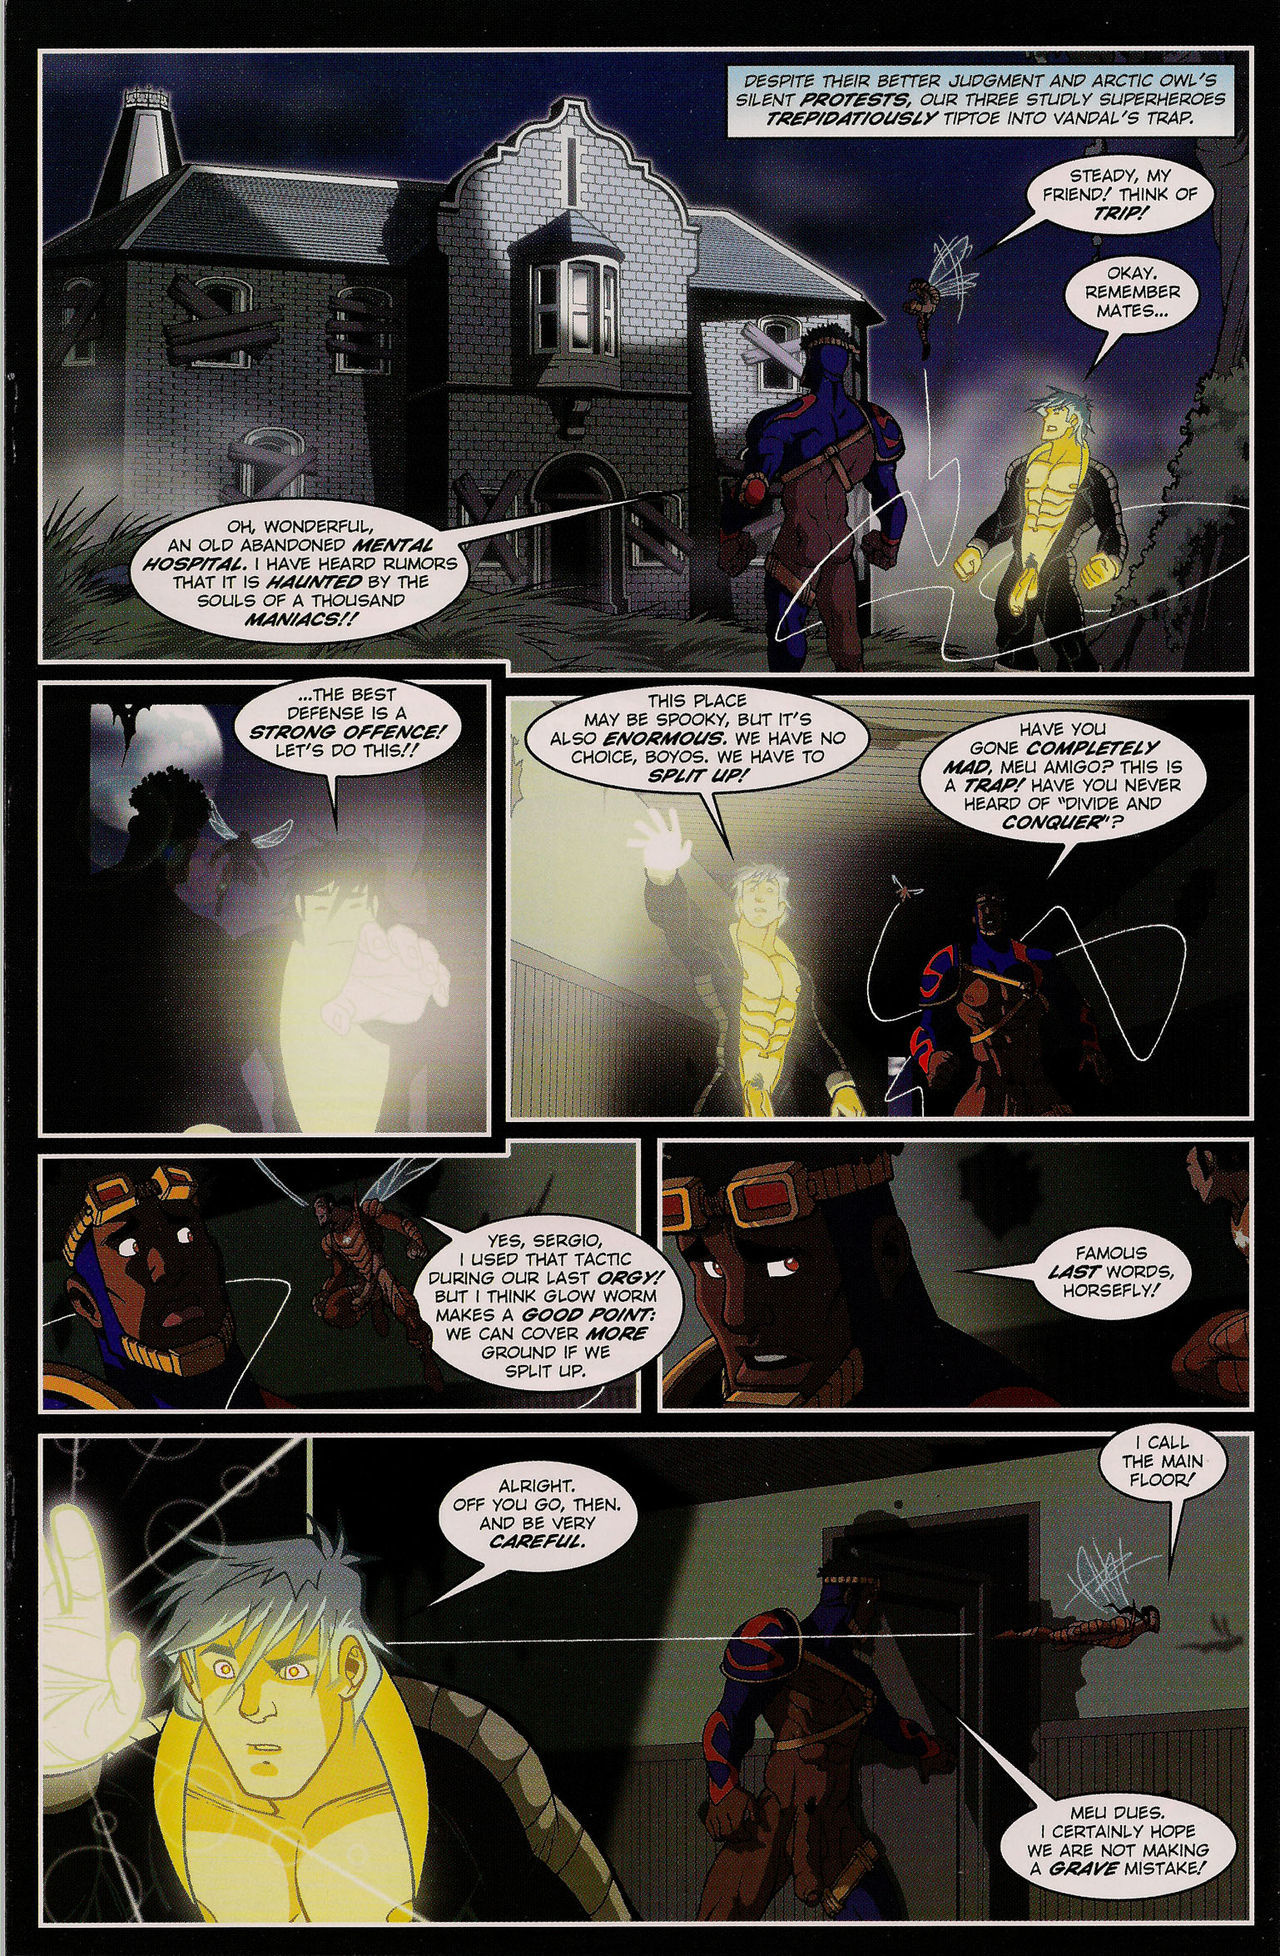 Naked Justice Beginnings 2 (Patrick Fillion) page 19